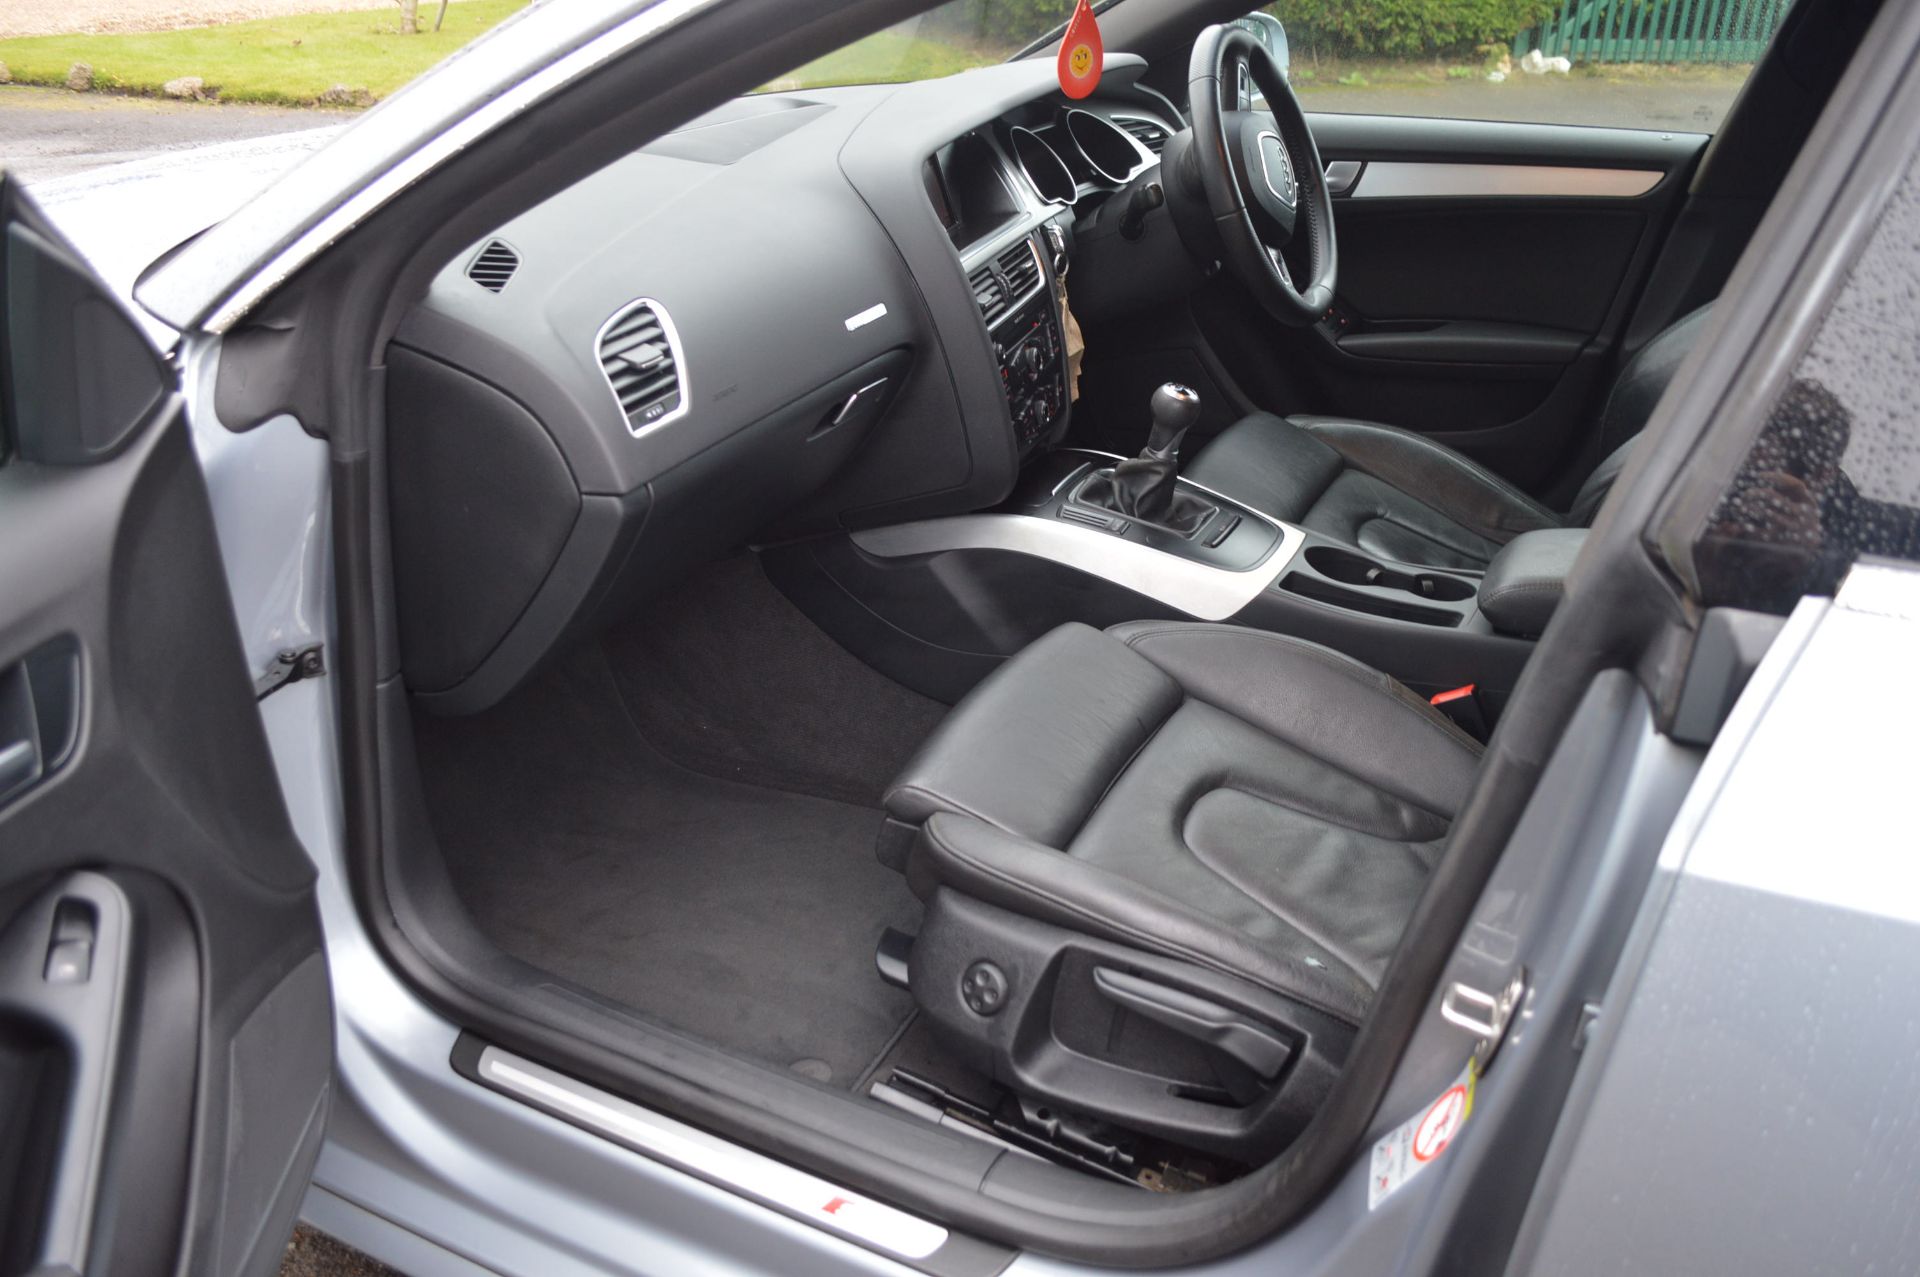 NR - 2011/11 REG AUDI A5 S LINE TDI, SERVICE HISTORY, 2 FORMER KEEPERS - Image 8 of 28